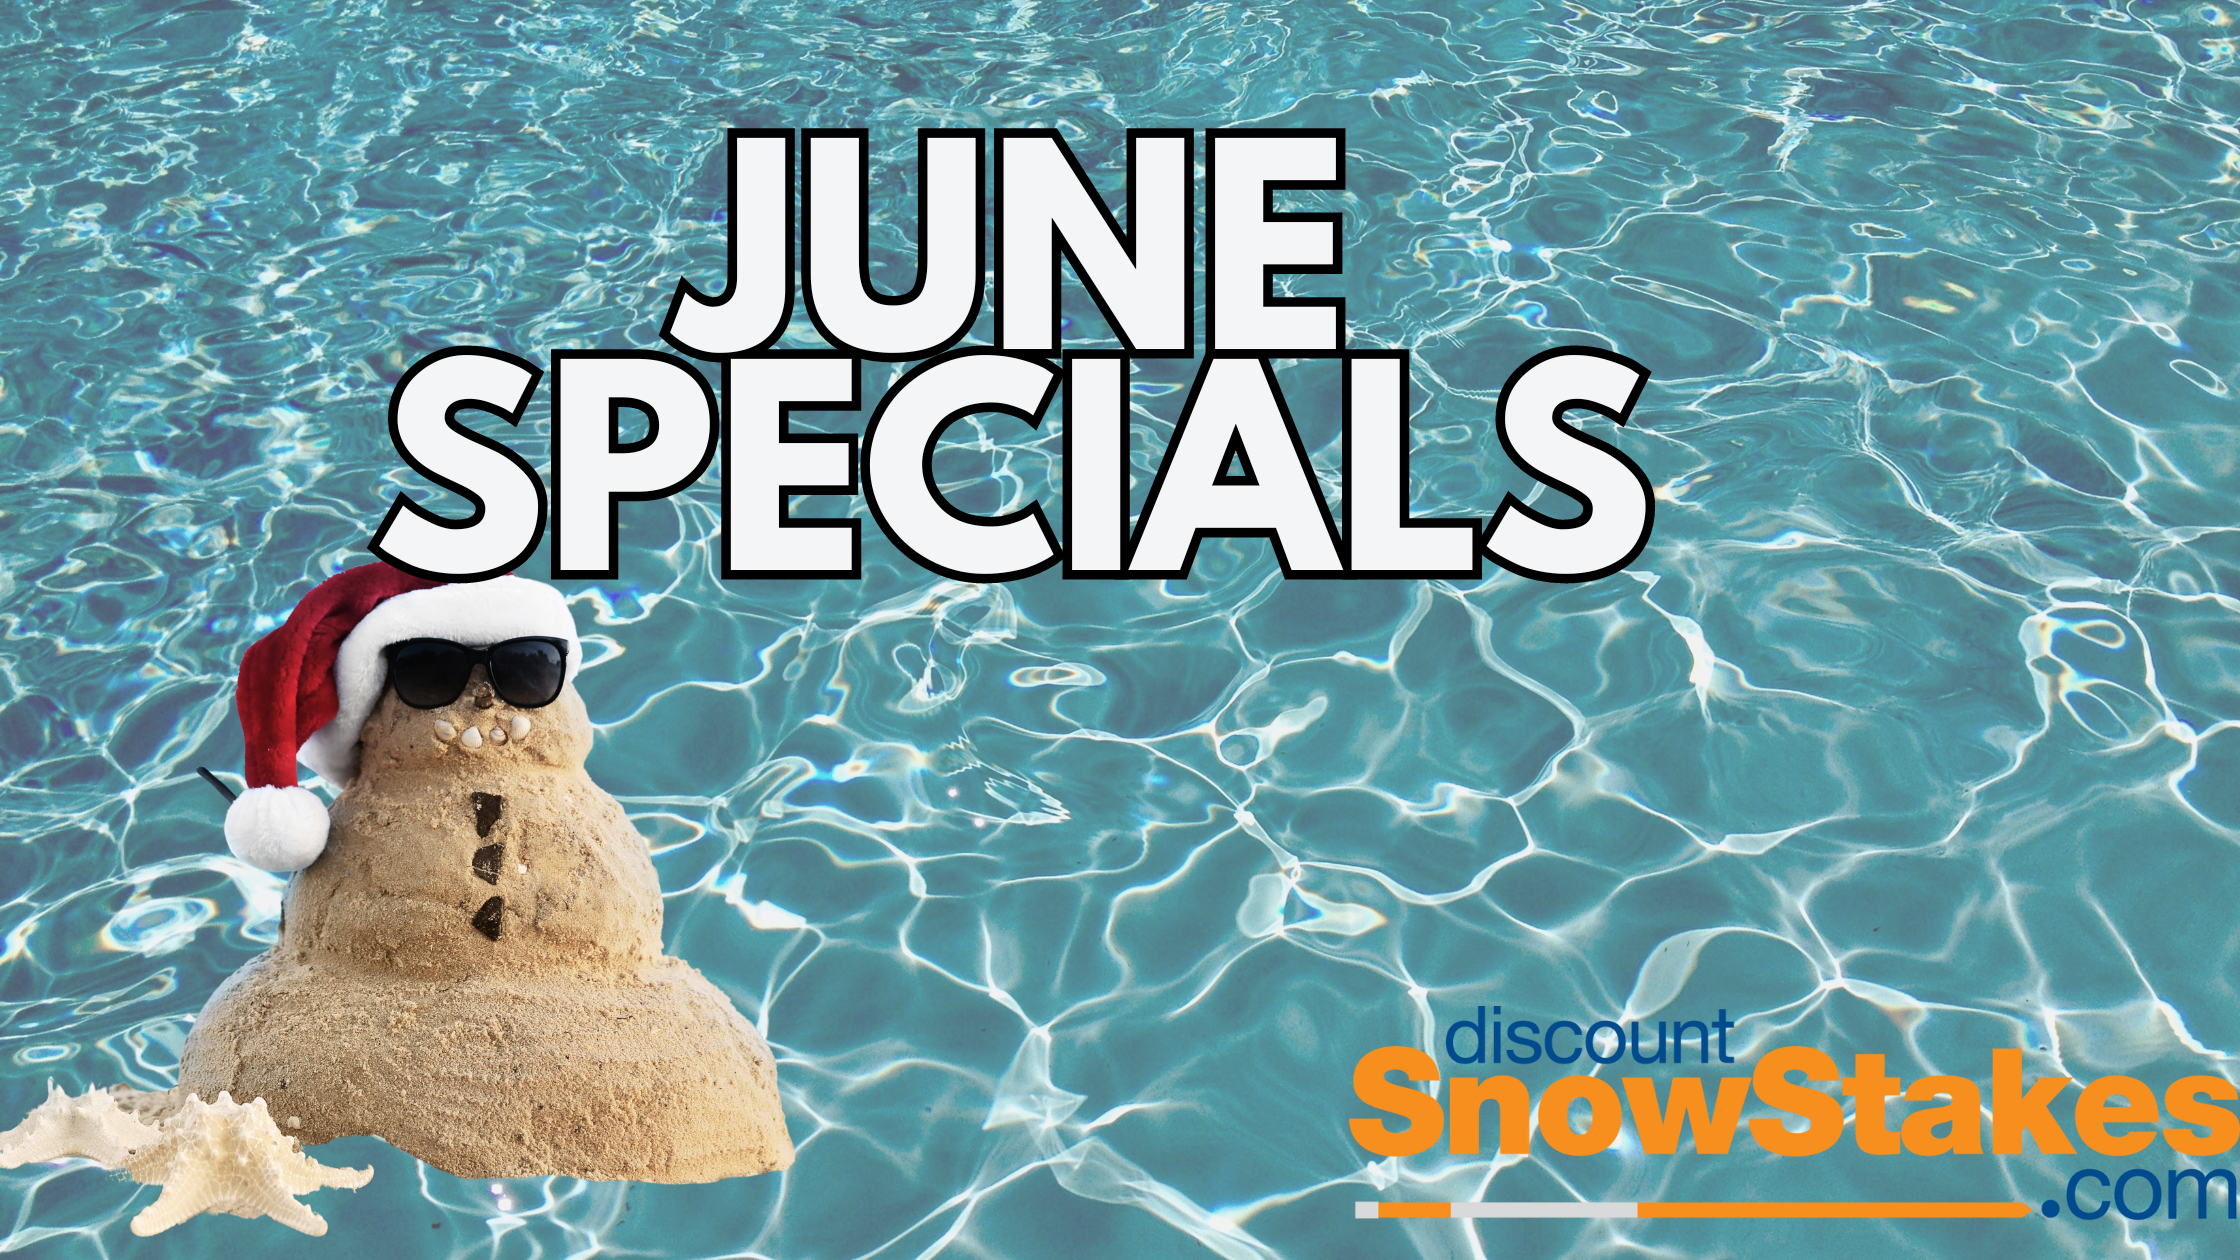 June Specials: 10% Off All Snow Stake Orders at Discount Snow Stakes!